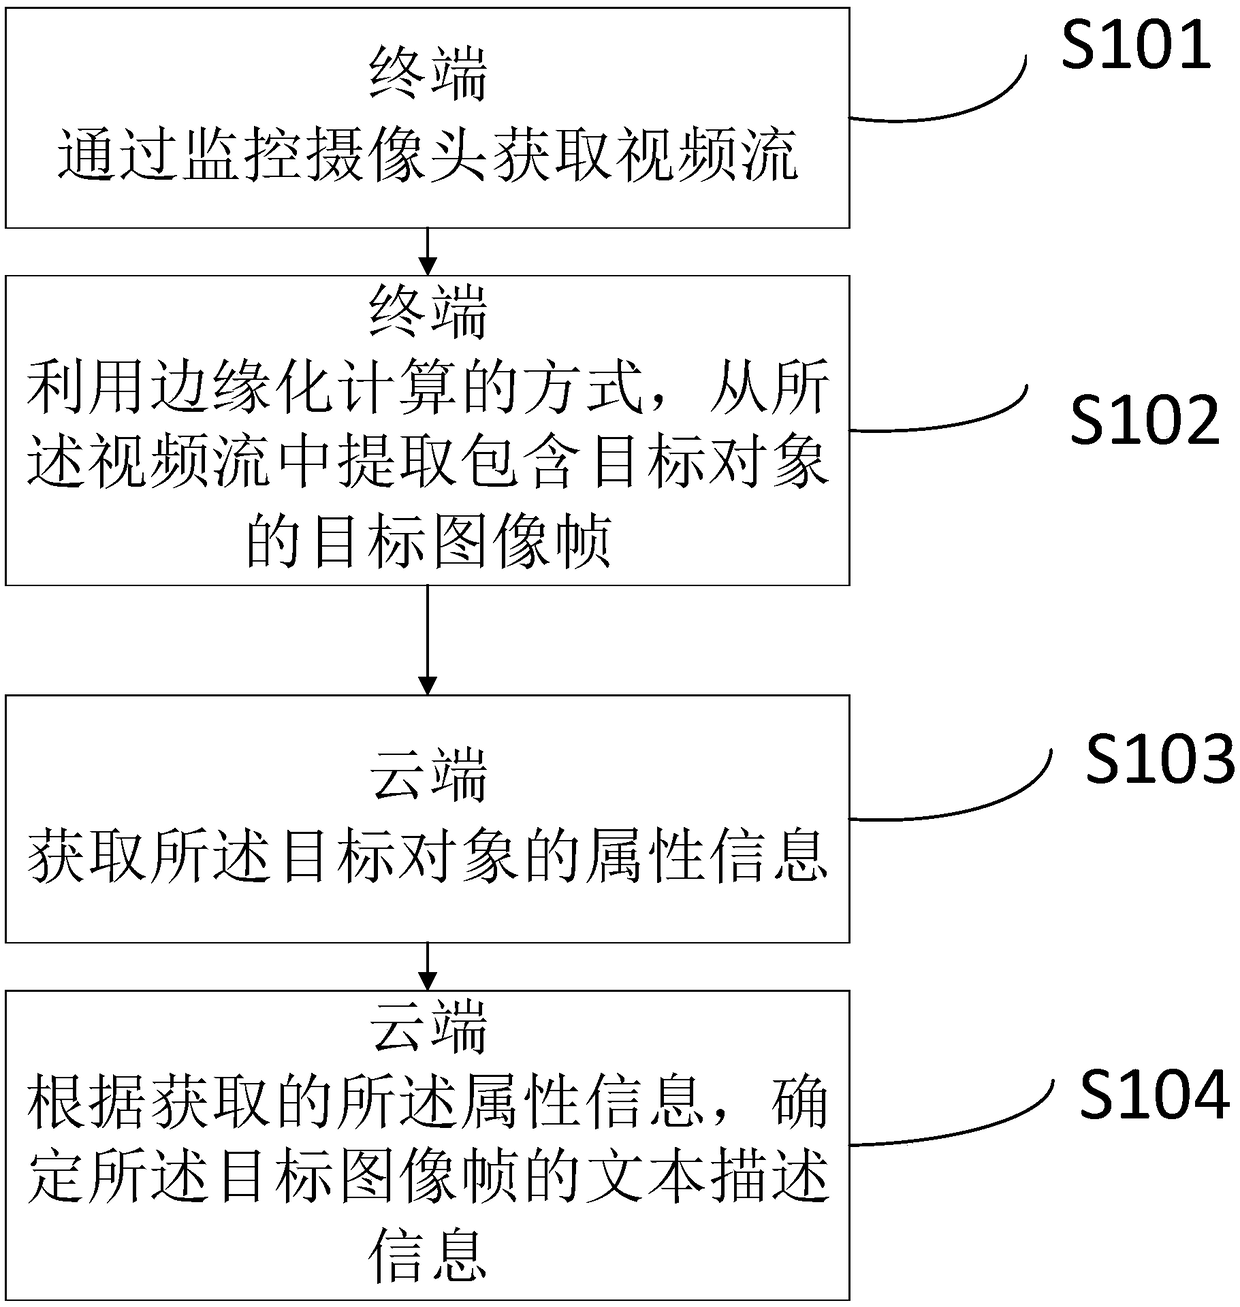 Image data processing method and system